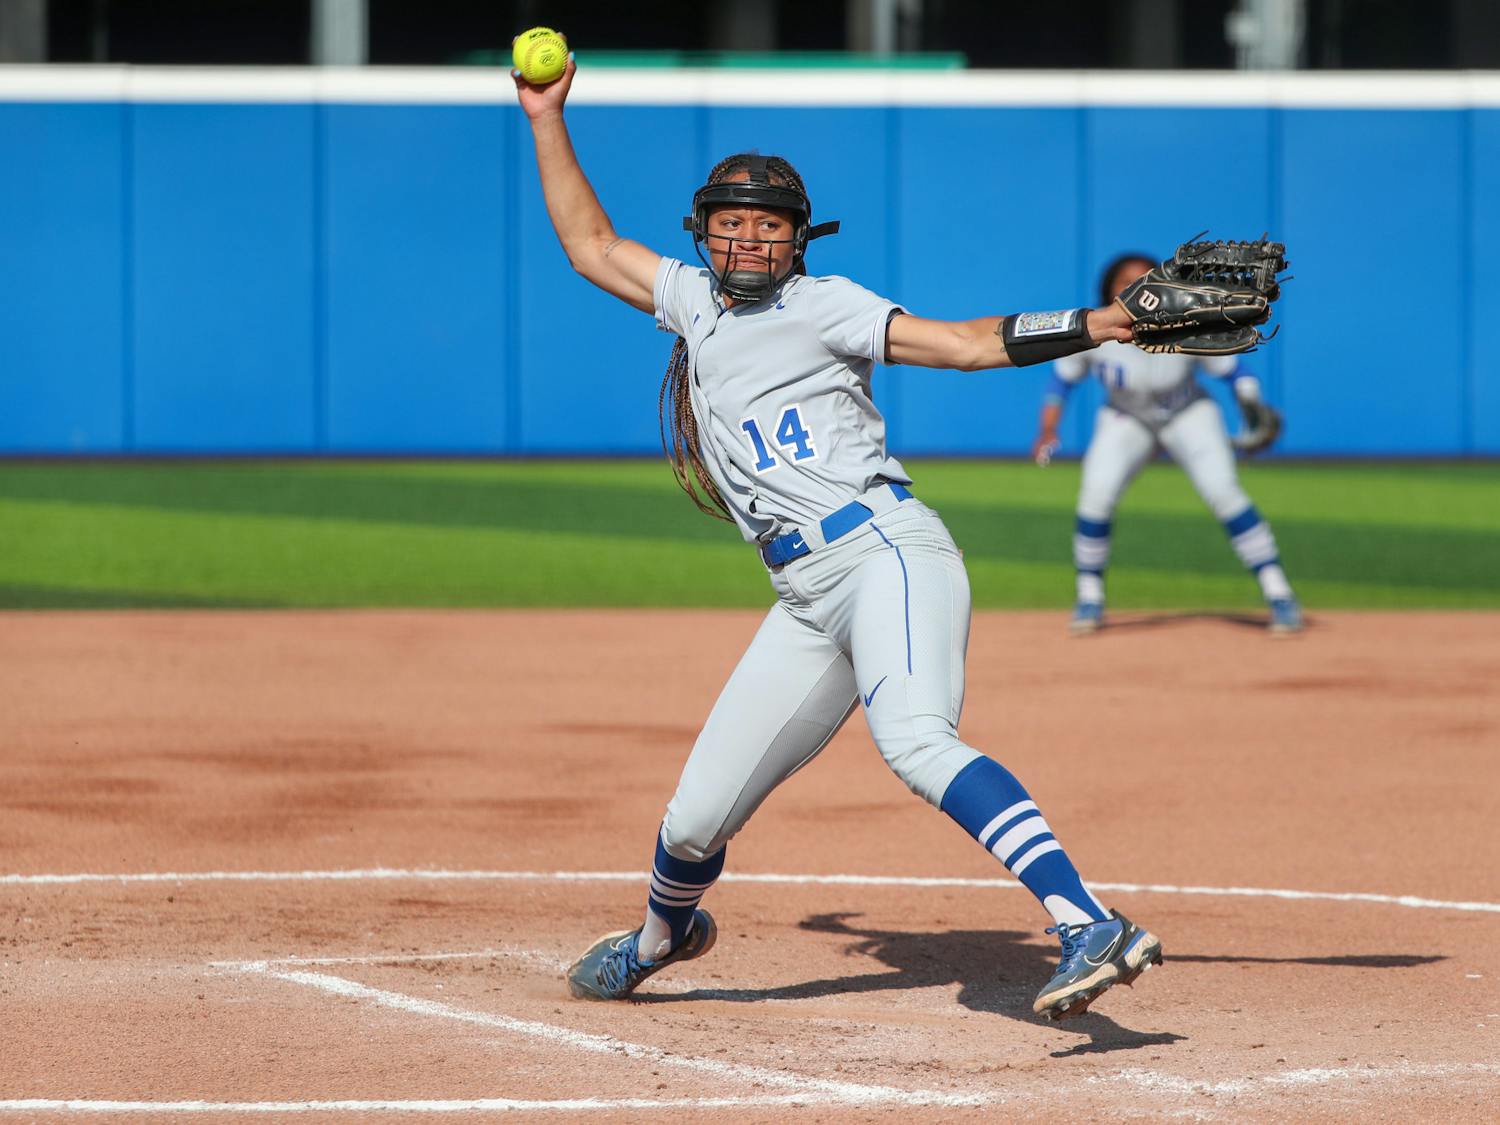 Junior pitcher Jala Wright finished her 2022 season with a 13-5 record and a 2.09 ERA while tossing a no-hitter.